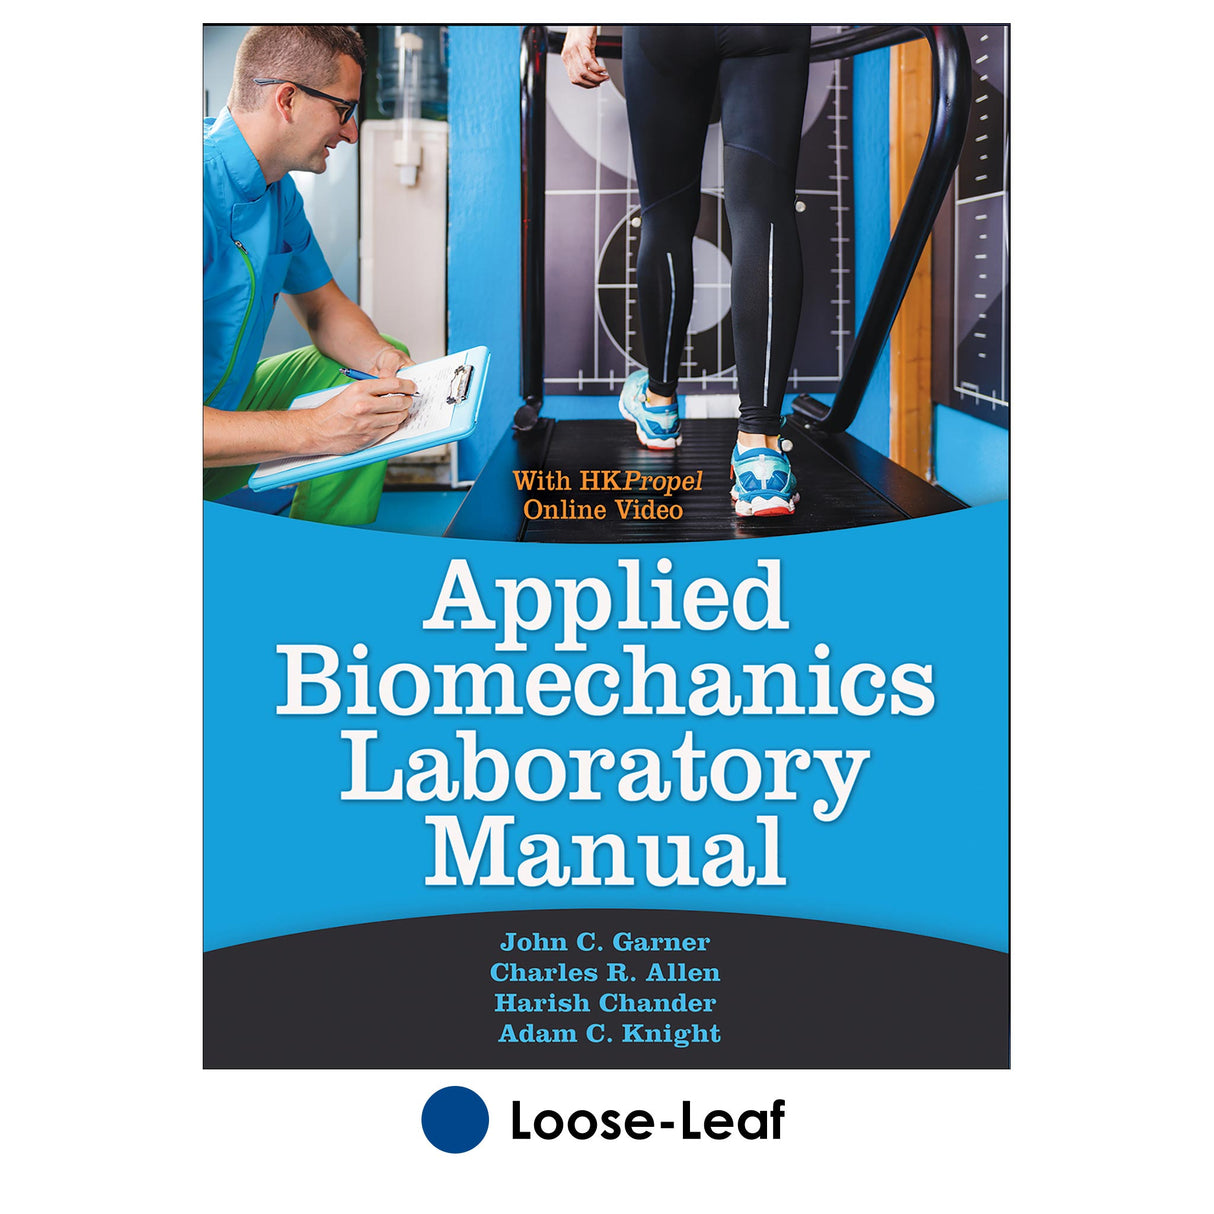 Applied Biomechanics Lab Manual With HKPropel Online Video-Loose-Leaf Edition